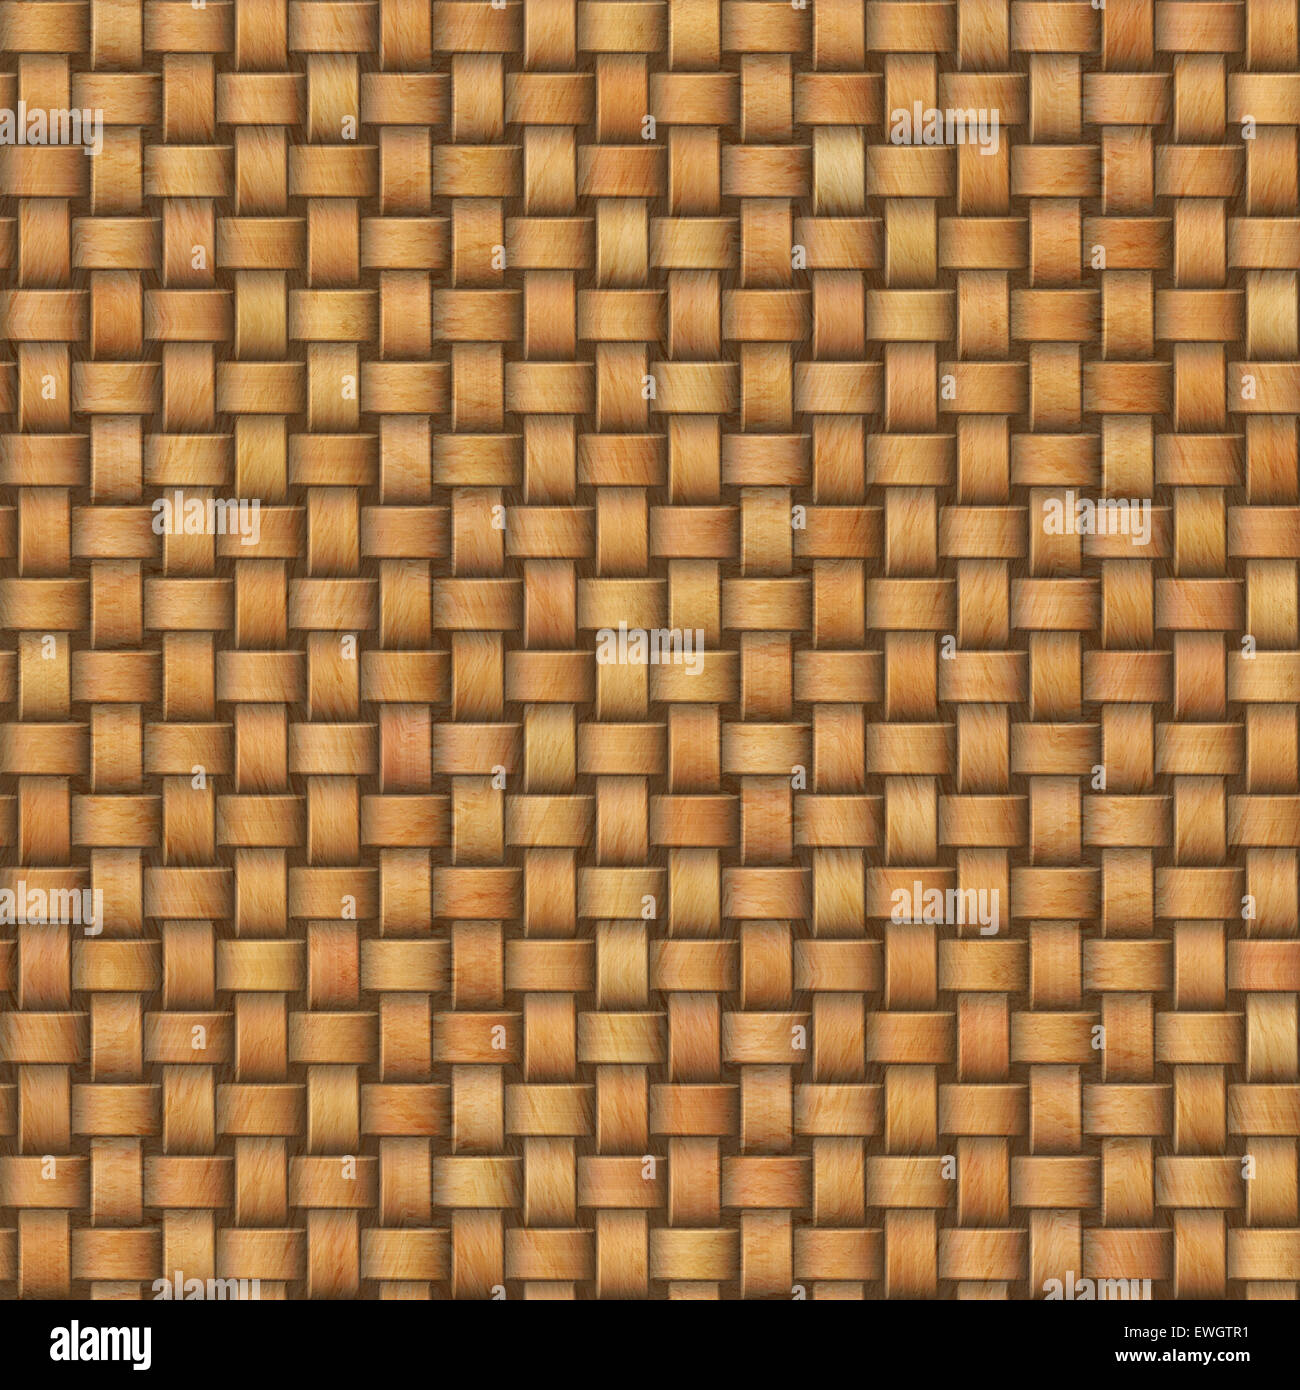 Seamless generated wicker or woven texture. Stock Photo